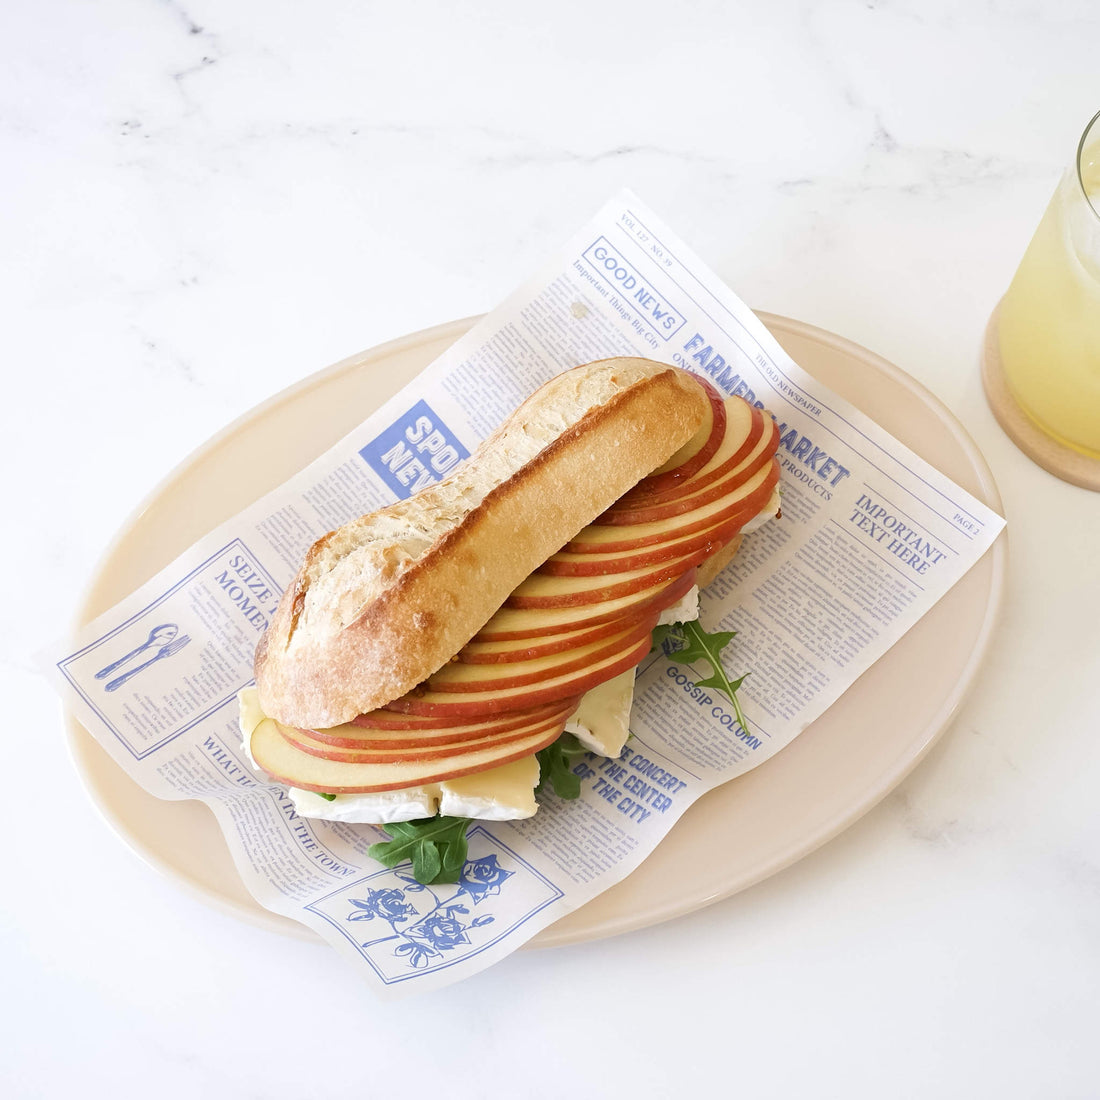 apple brie cheese sandwich on newspaper printed deli paper in blue